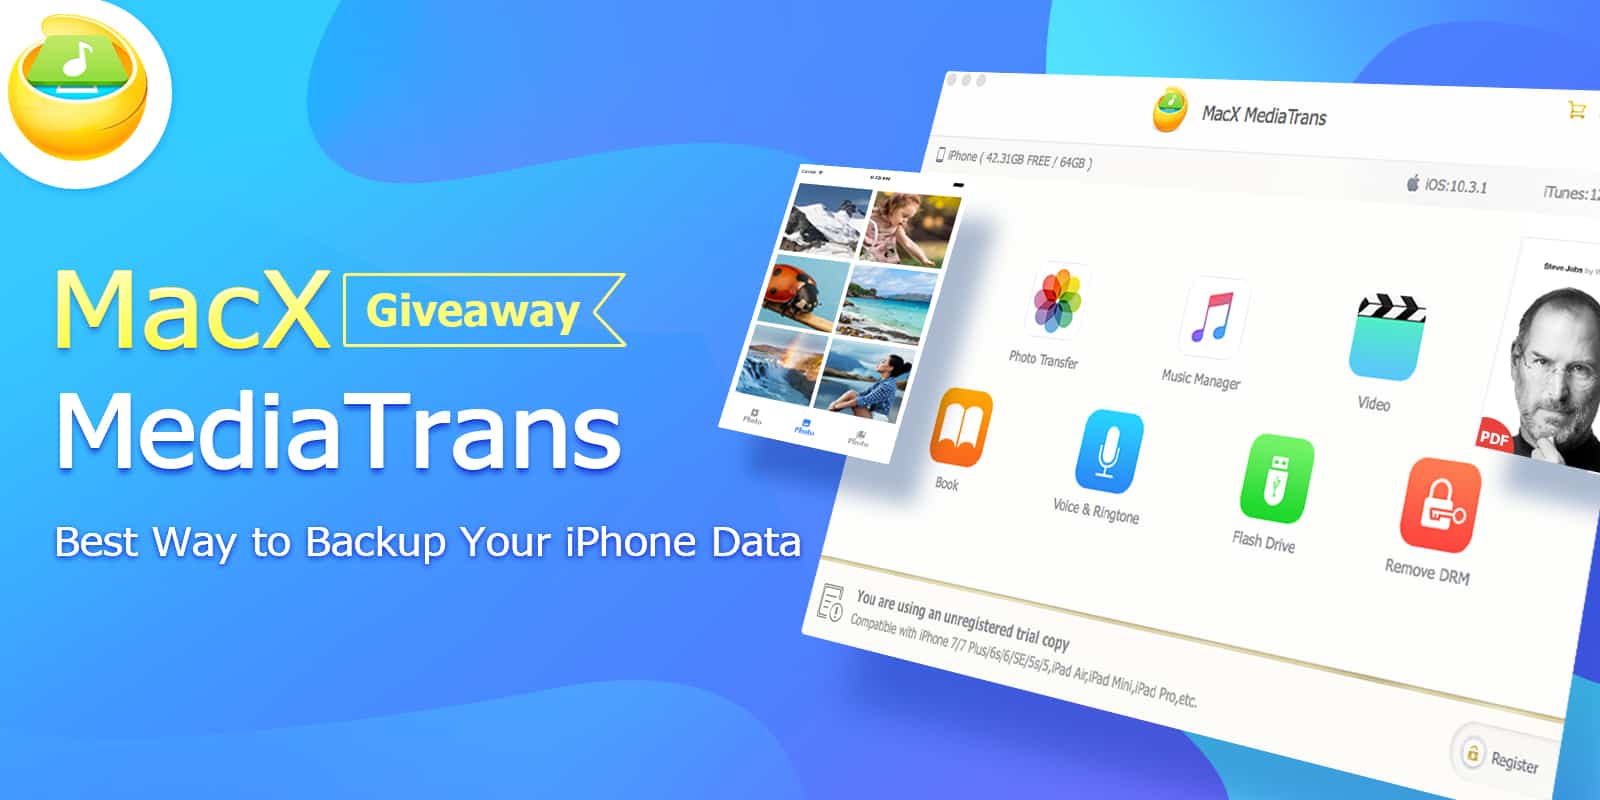 For a limited time, you can grab a free licensed copy of iPhone data syncer MediaTrans.